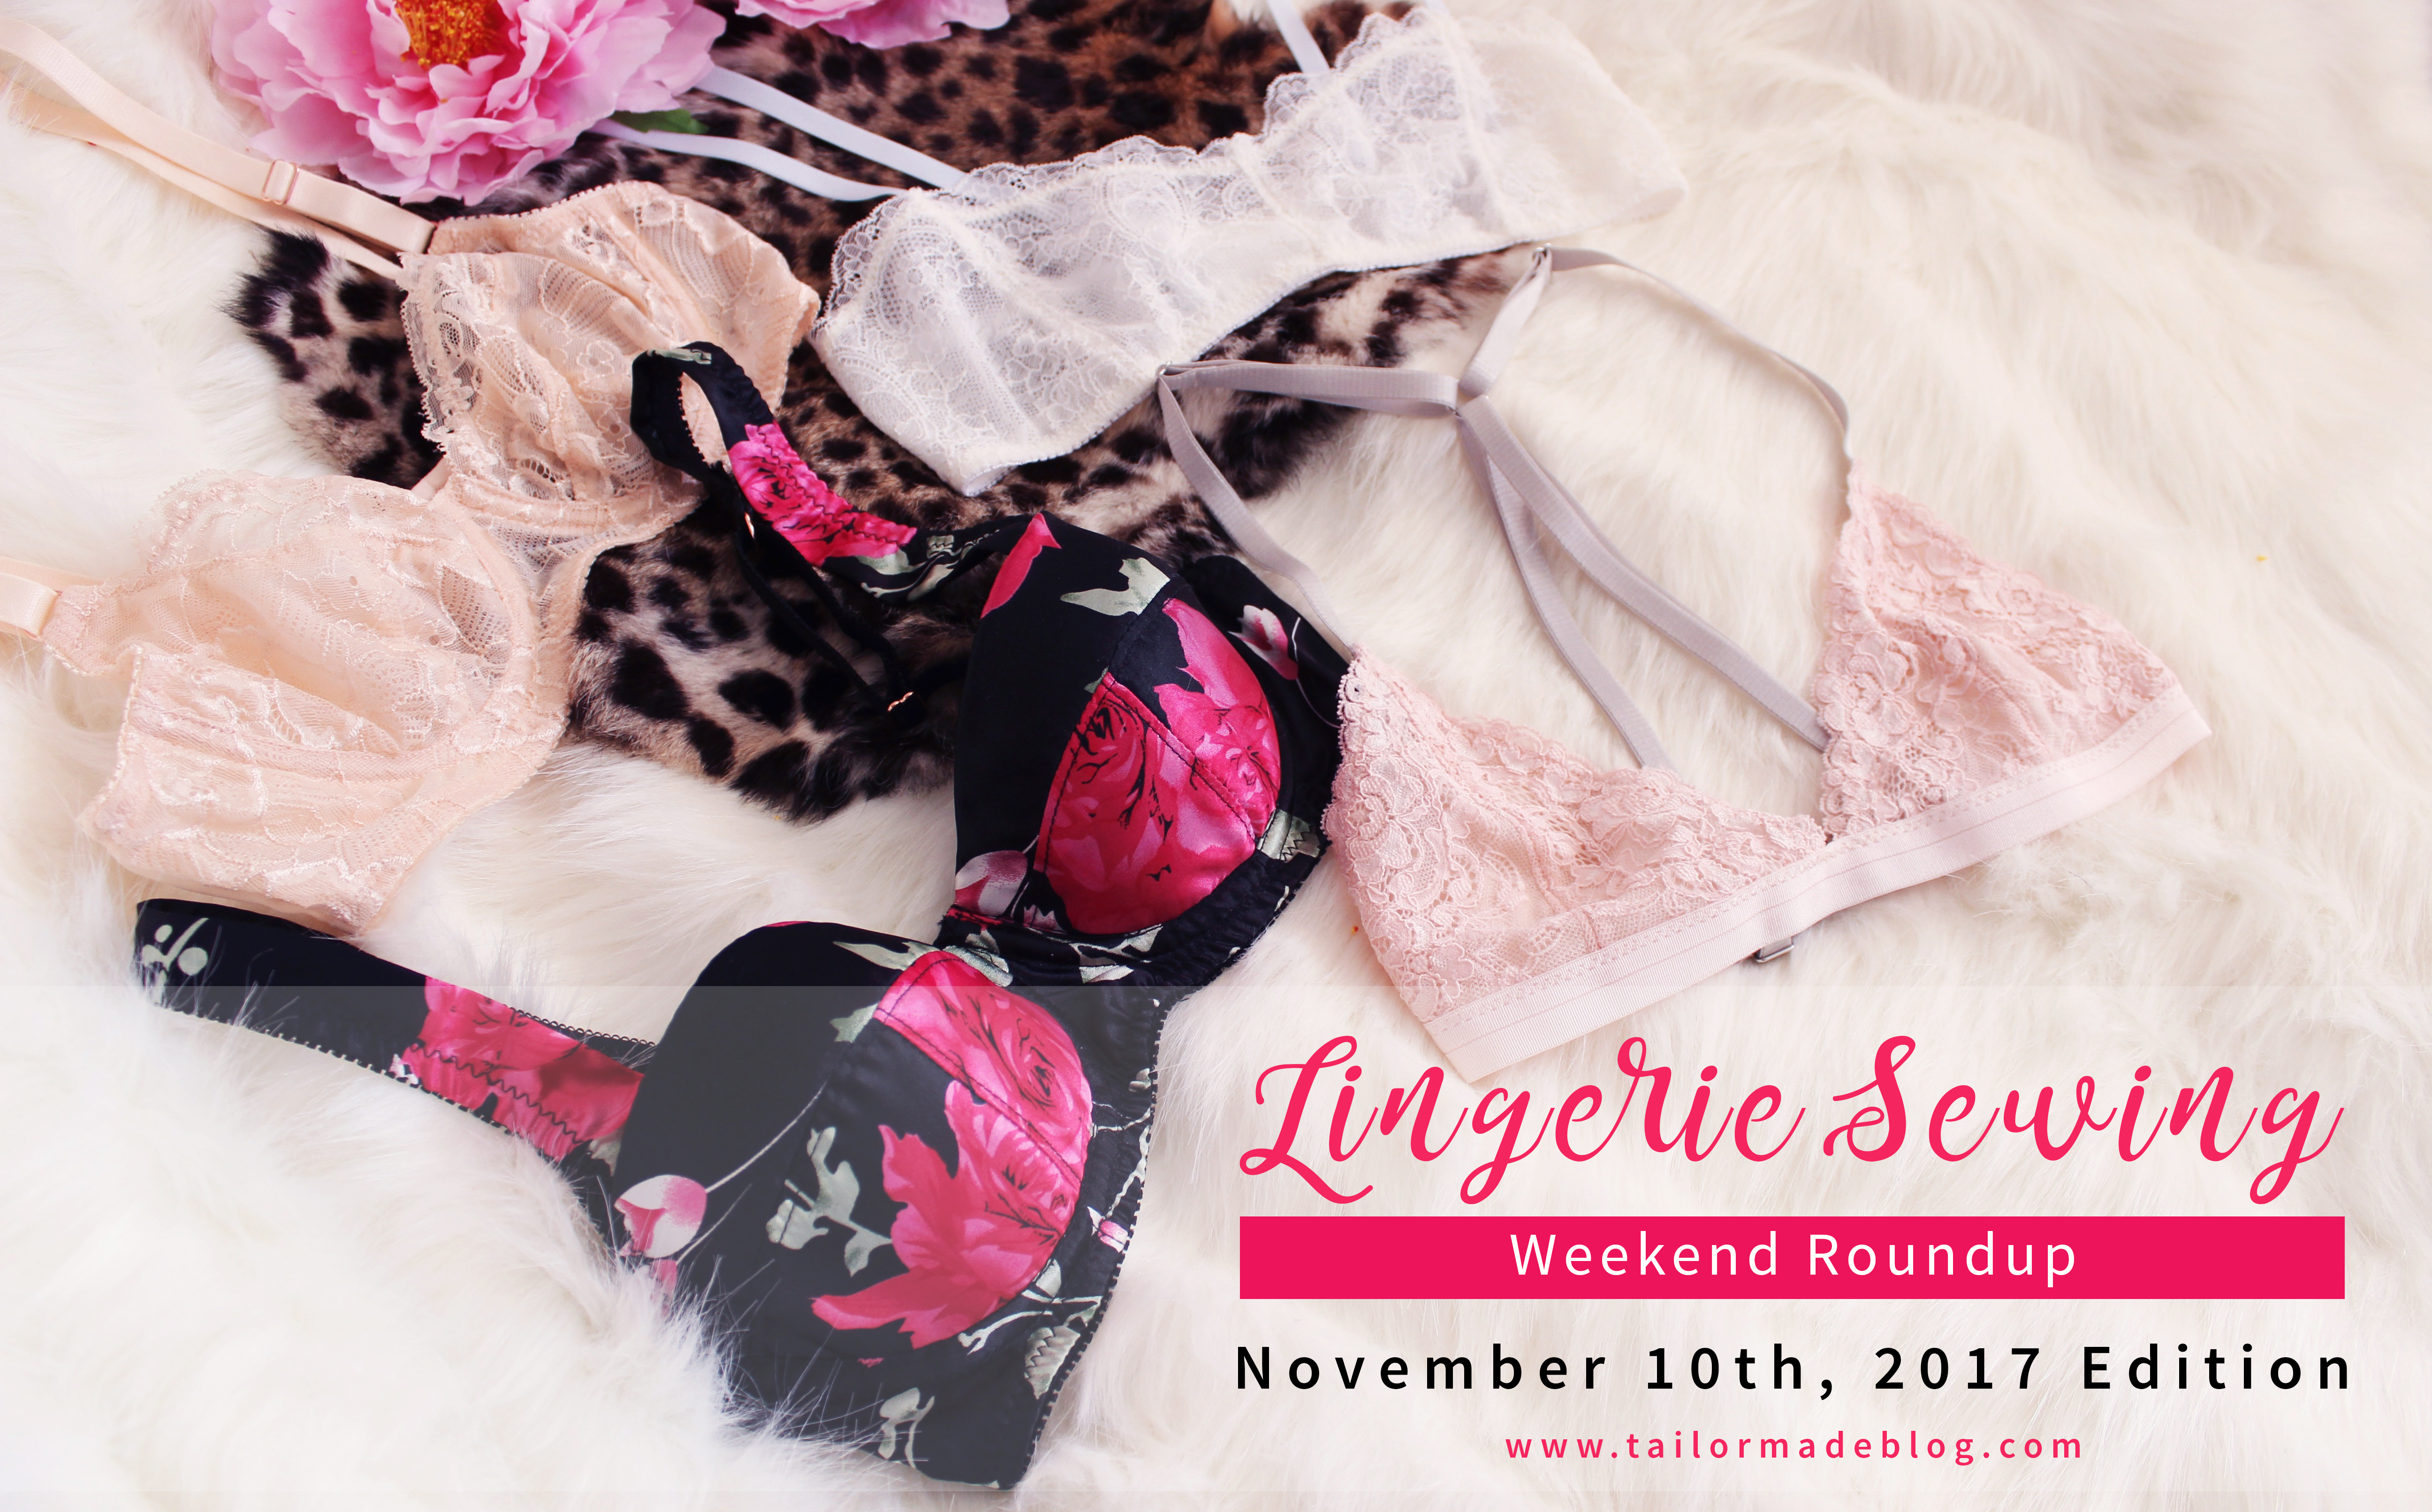 November 10th 2017 Lingerie Sewing Weekend Round Up Latest news and makes and sewing projects from the lingerie sewing bra making community